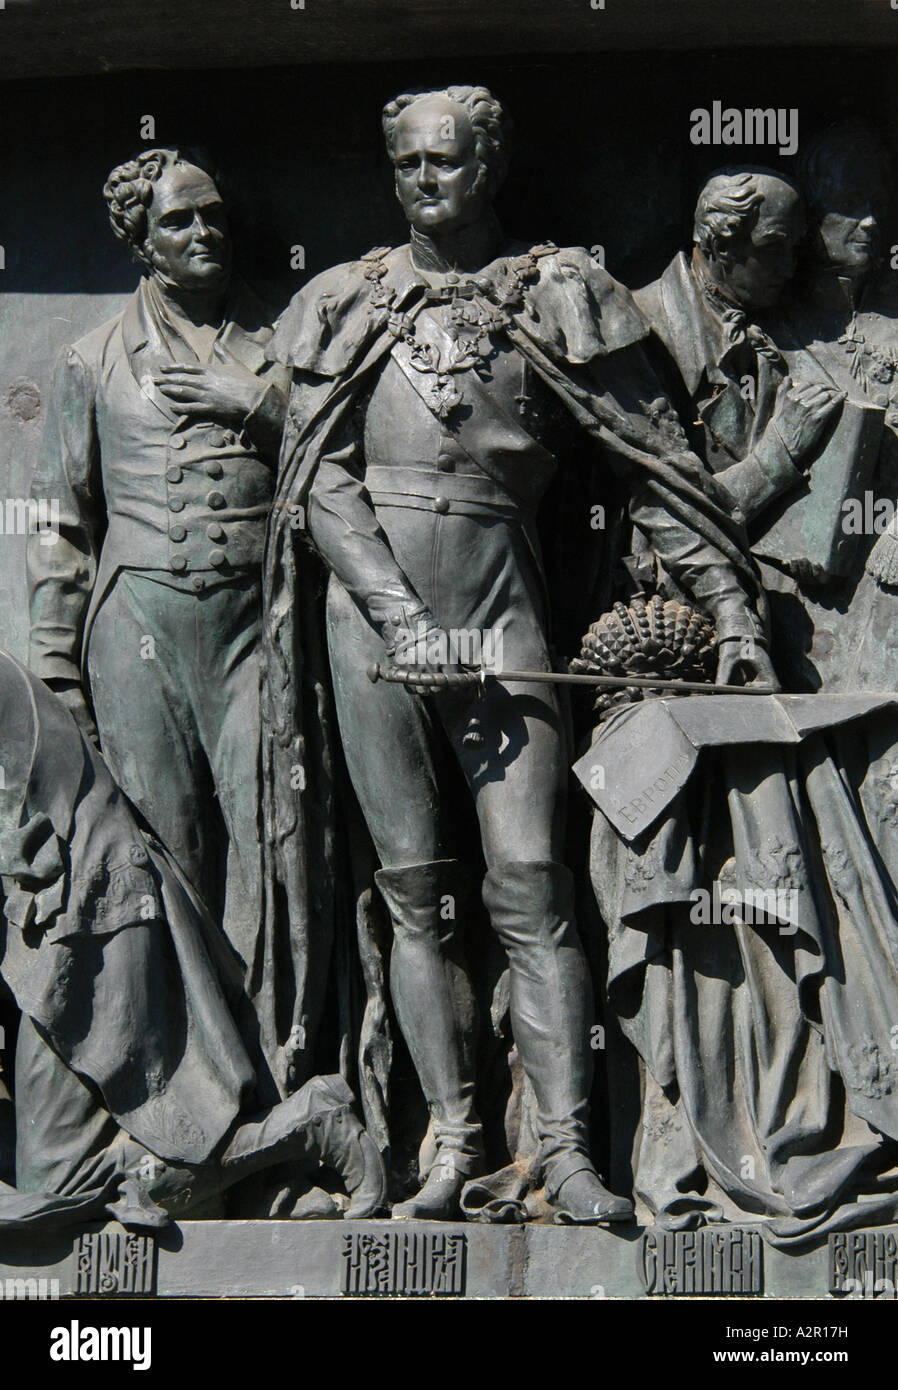 Russian tsar Alexander the First. Detail of the Monument to the Millennium of Russia in Veliky Novgorod, Russia Stock Photo